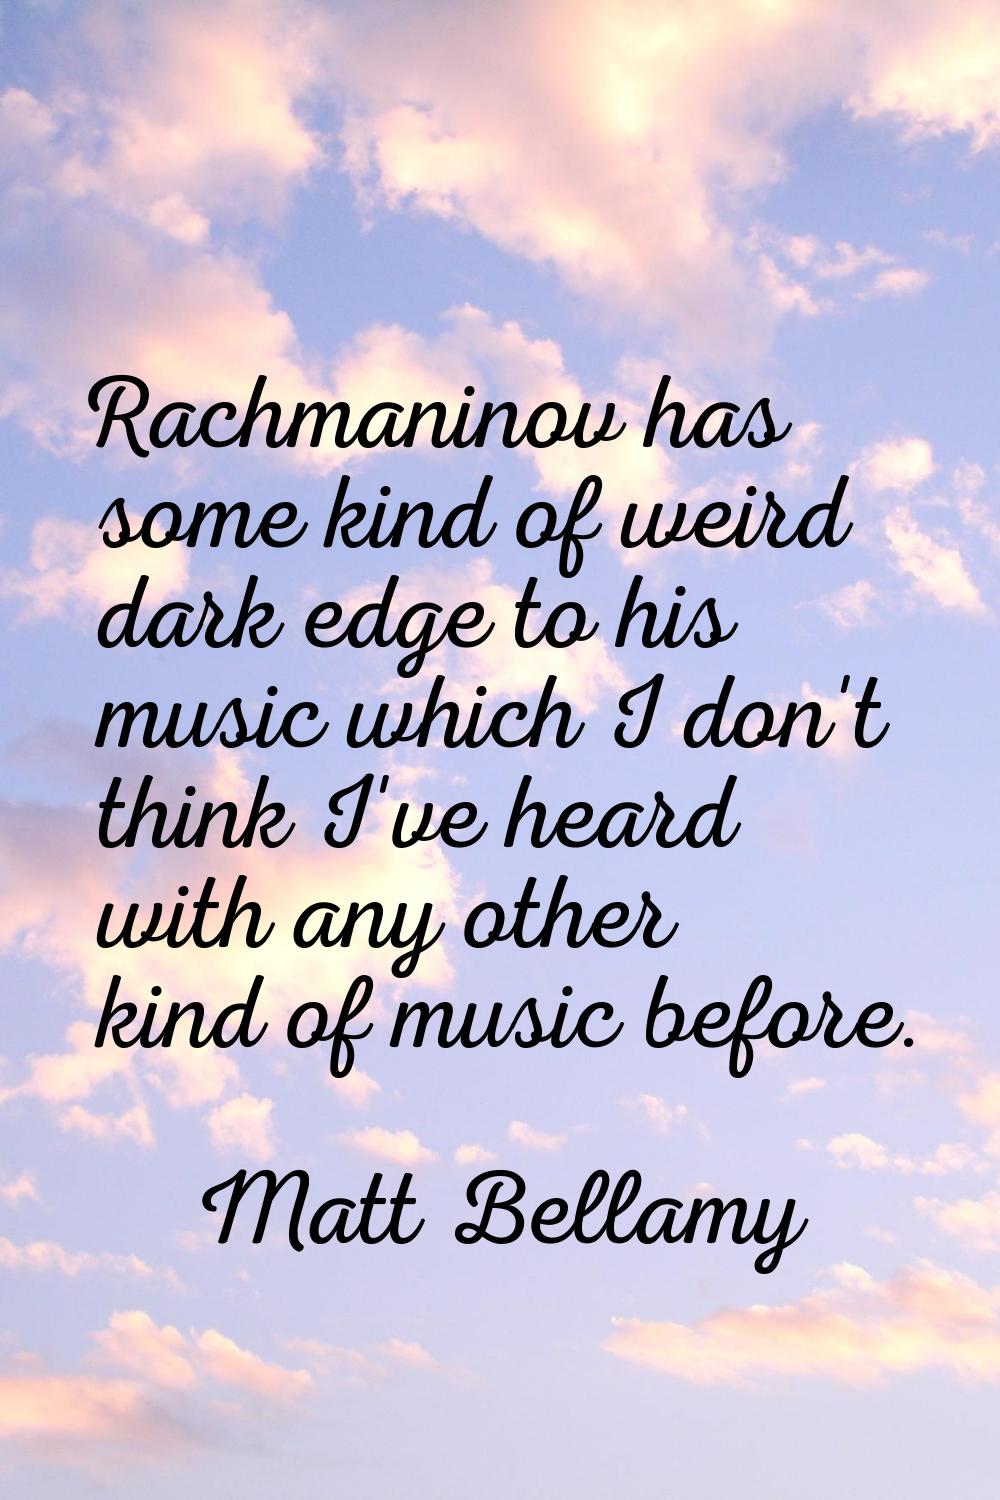 Rachmaninov has some kind of weird dark edge to his music which I don't think I've heard with any o